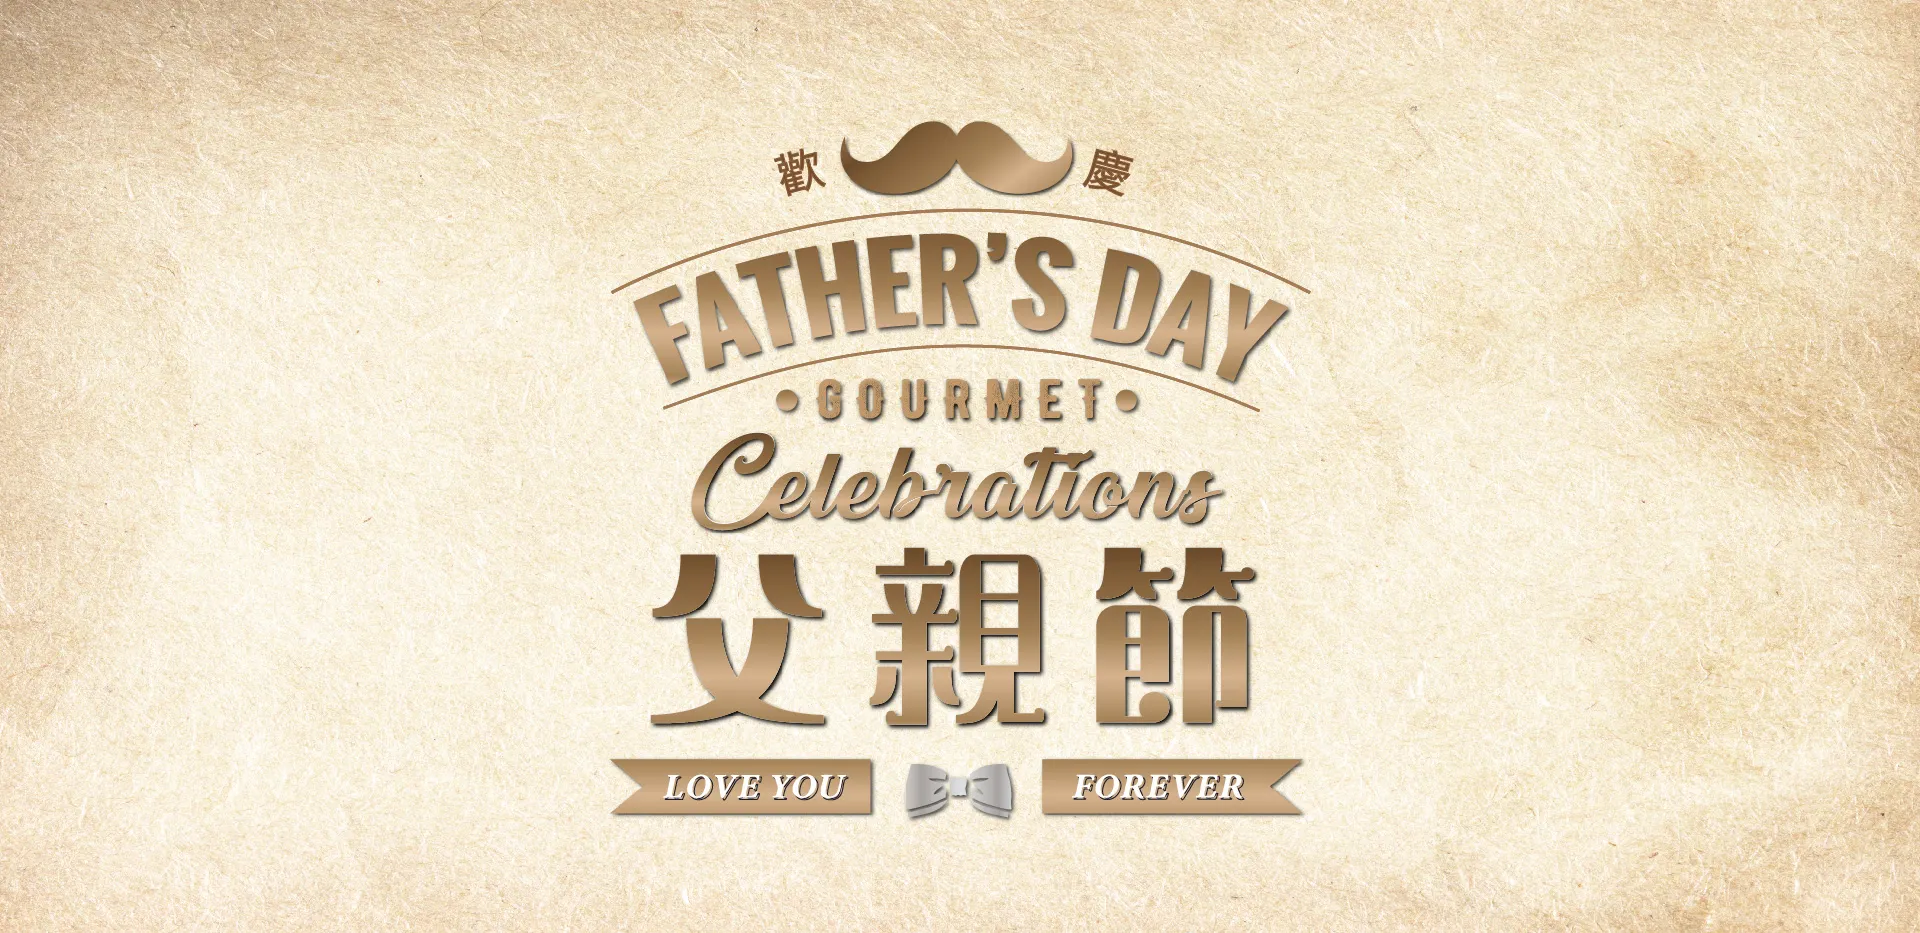 Father's day promotion banner_1920x933_TC